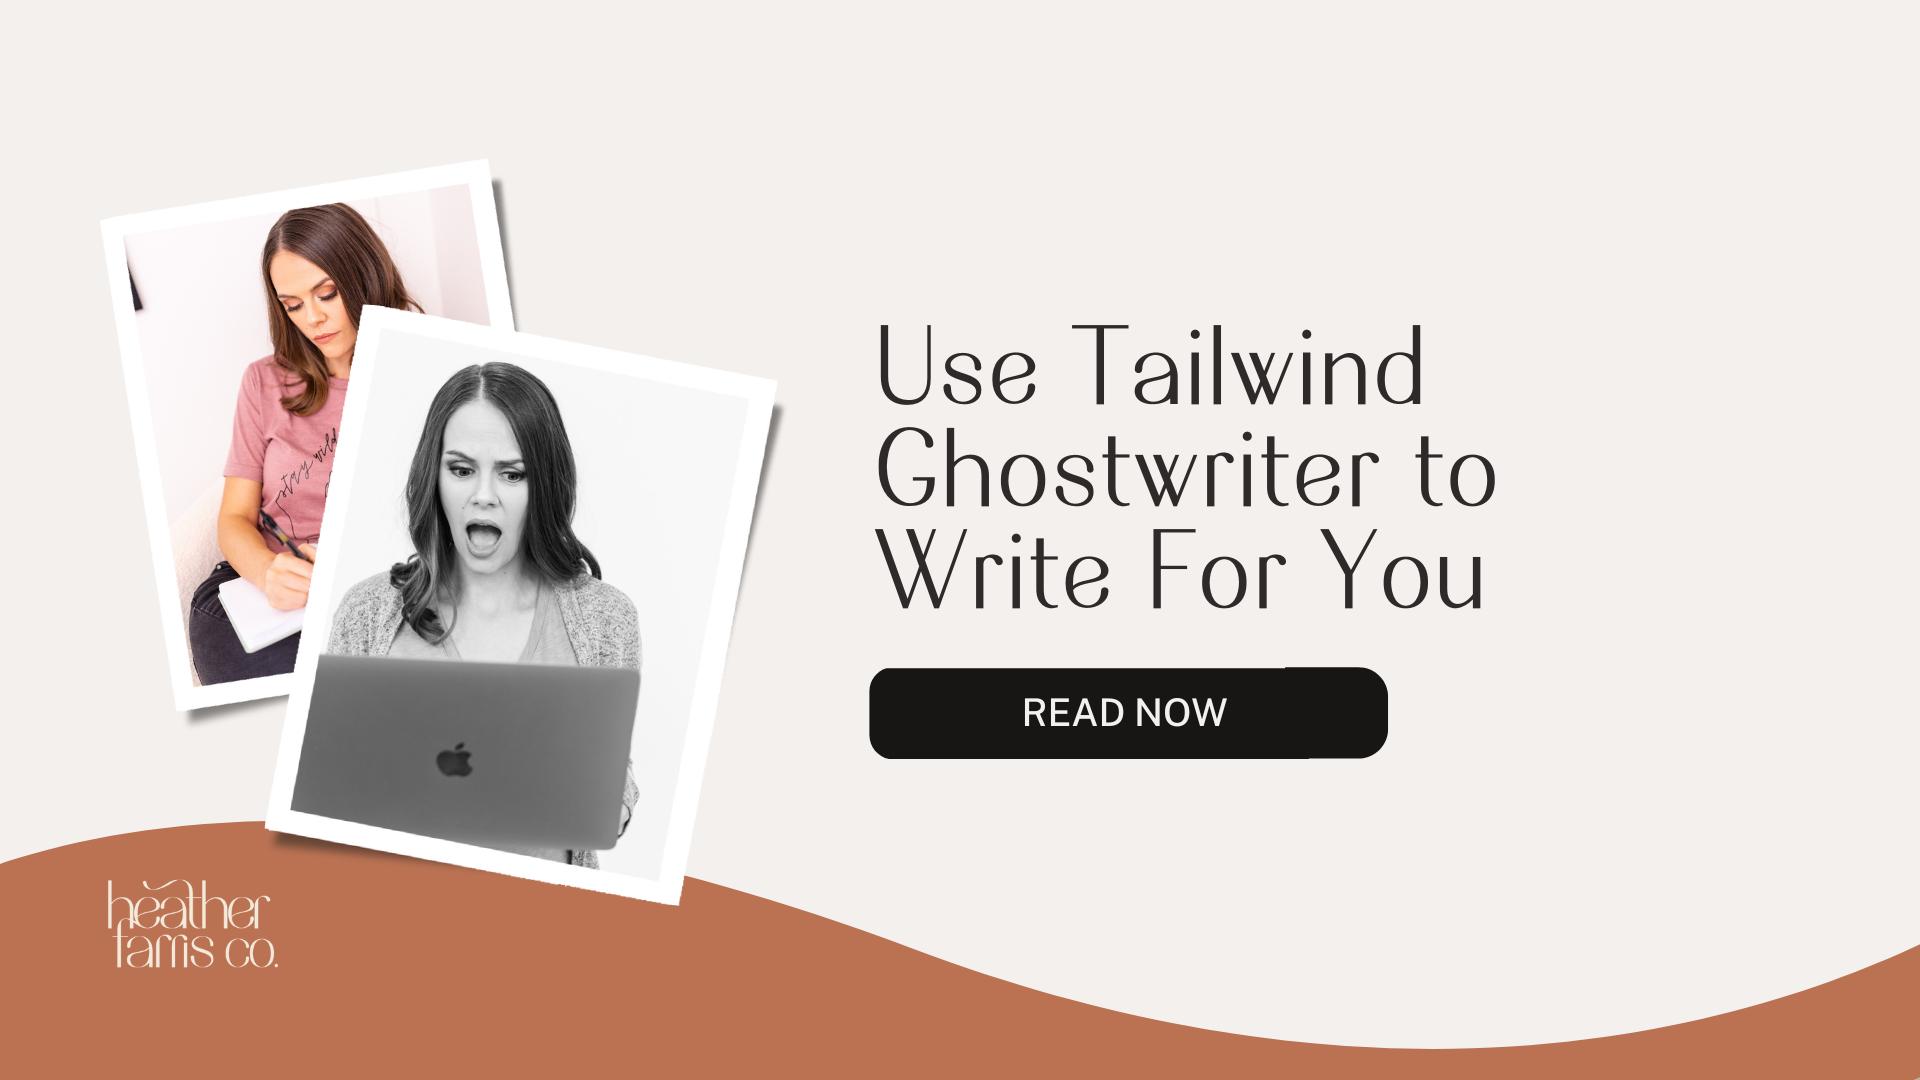 Tailwind Ghostwriter will write your pin descriptions for you